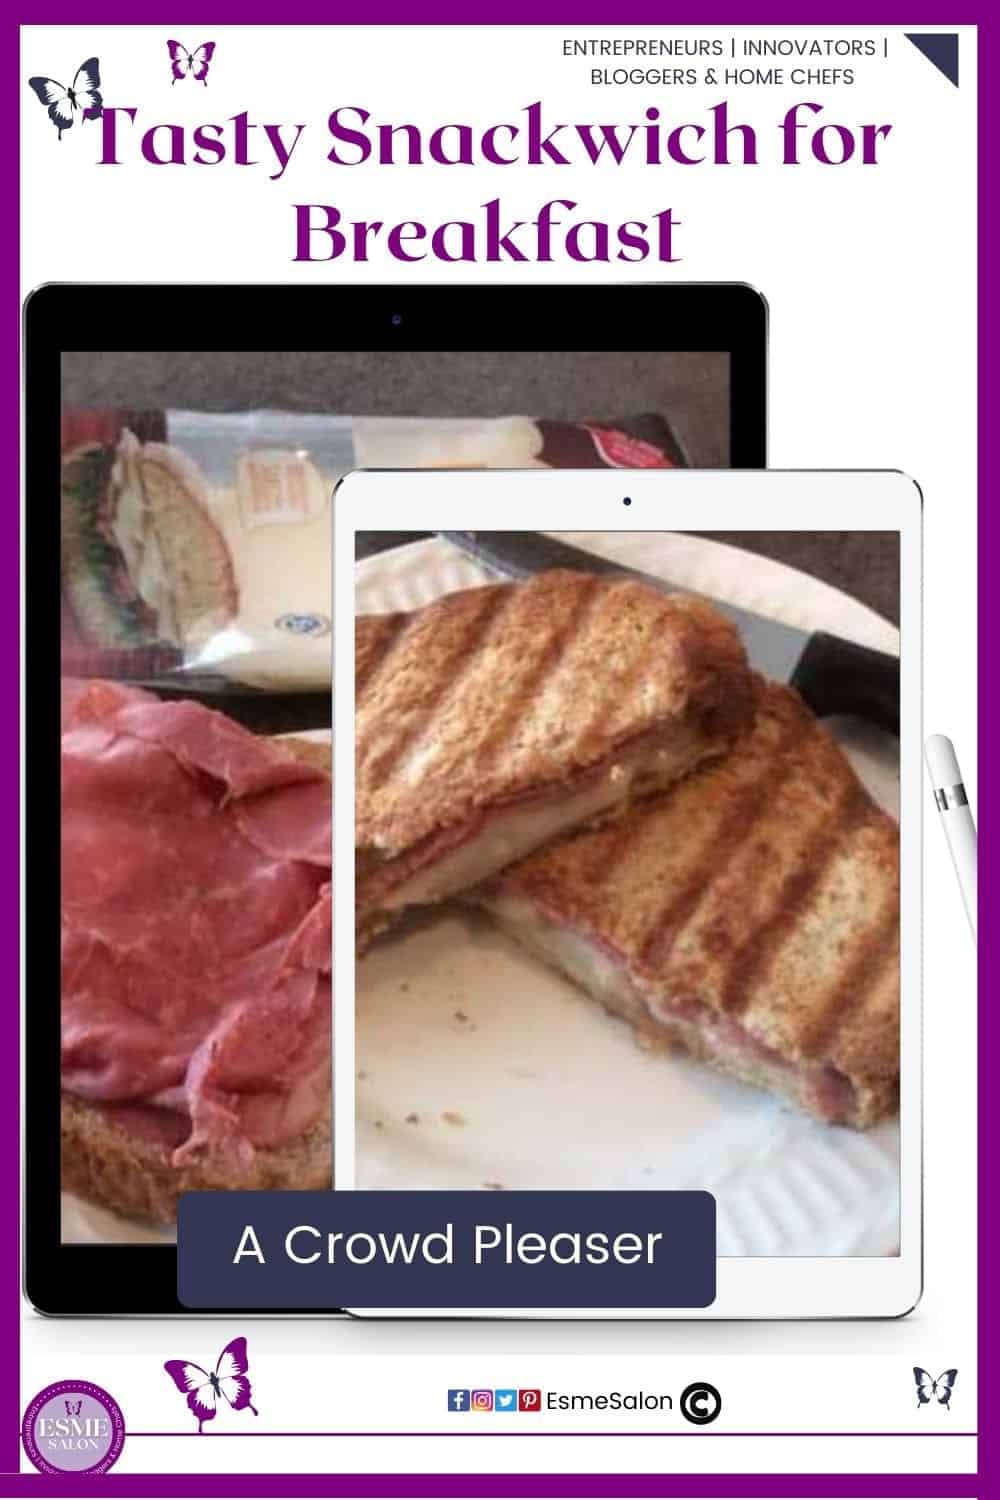 an image of an open sandwich with corned beef, onion and cheese on the side on a white side plate as well as an already toasted Snackwich for Breakfast